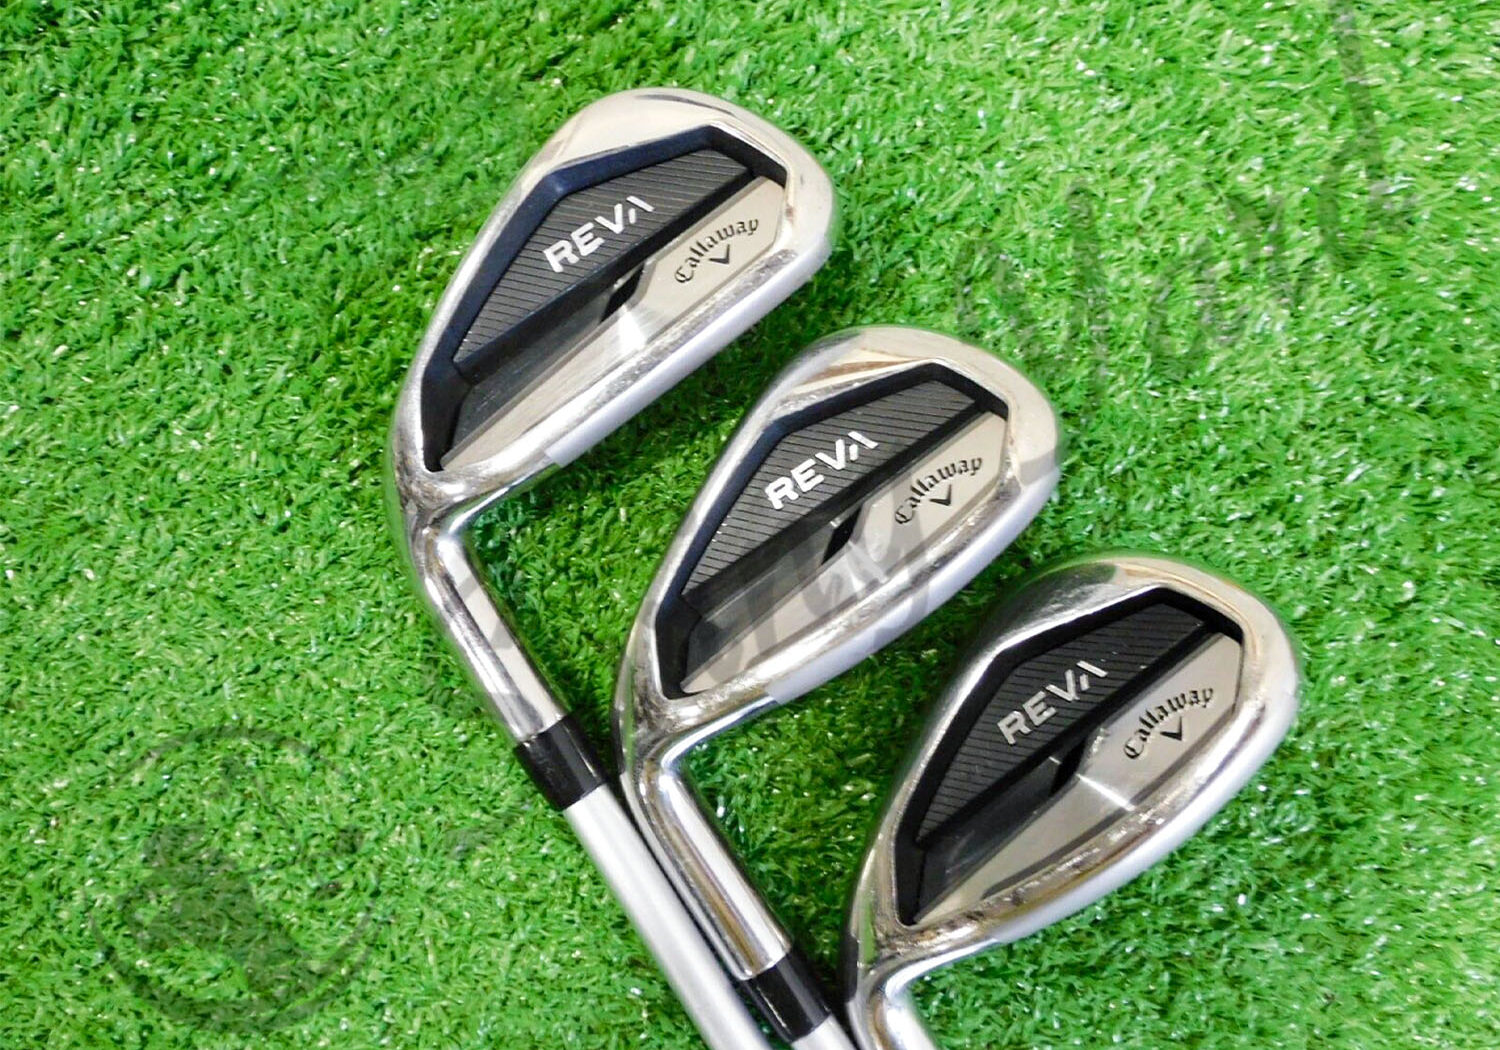 The Callaway Reva Womens Irons for testing at the golf course